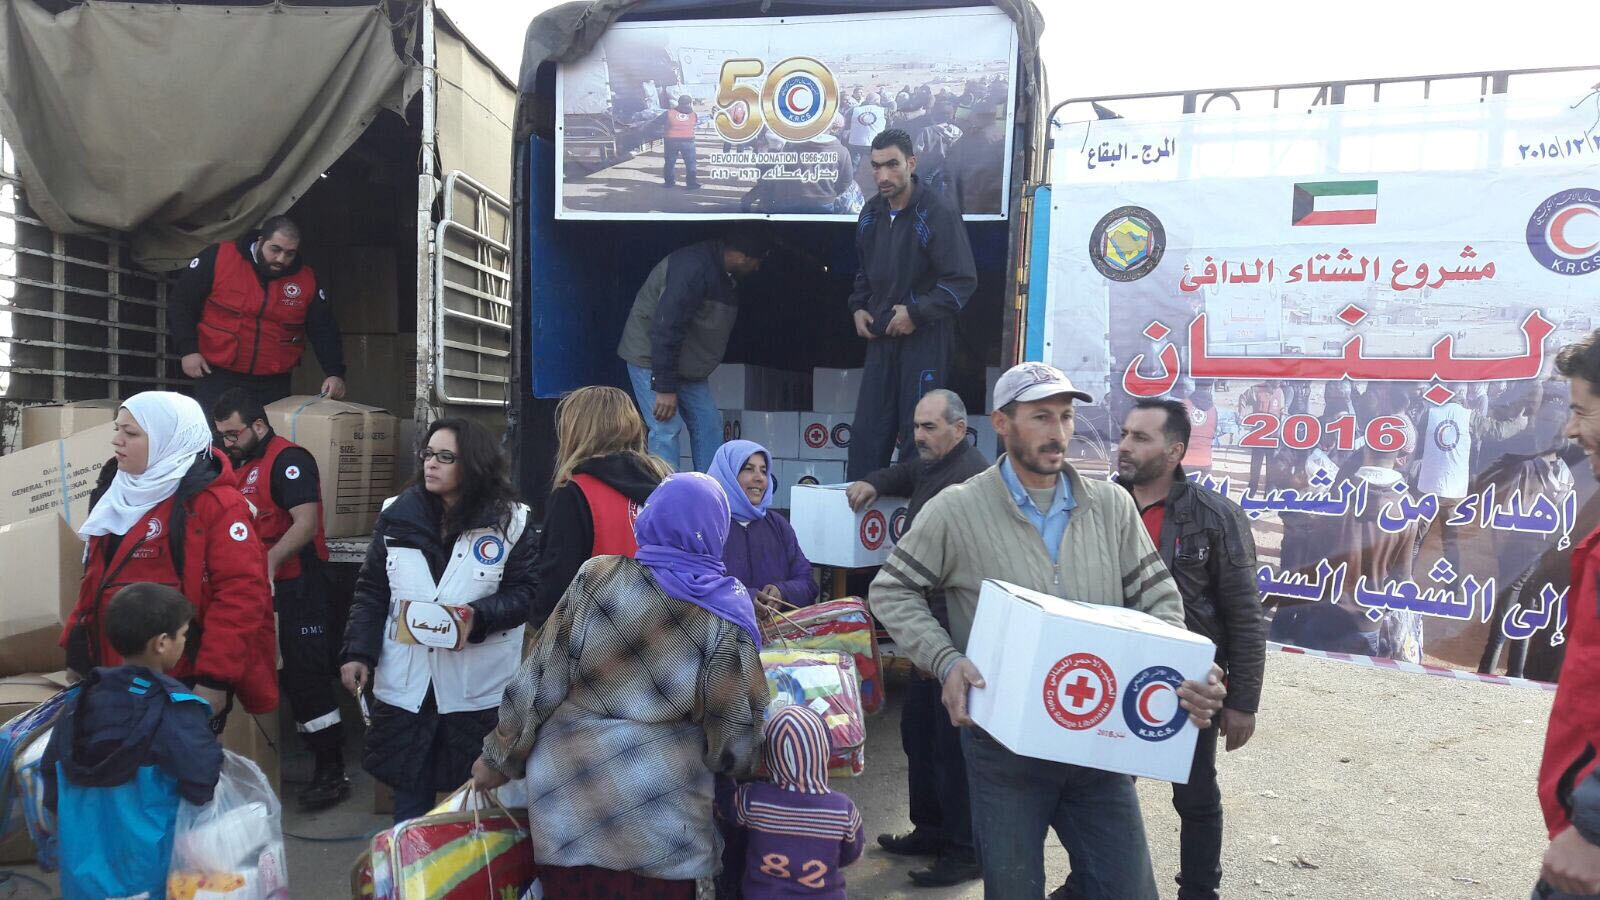 Kuwait Red Crescent Society (KRCS) "warm winter campaign for 2016" to aid Syrian refugee families in Lebanon